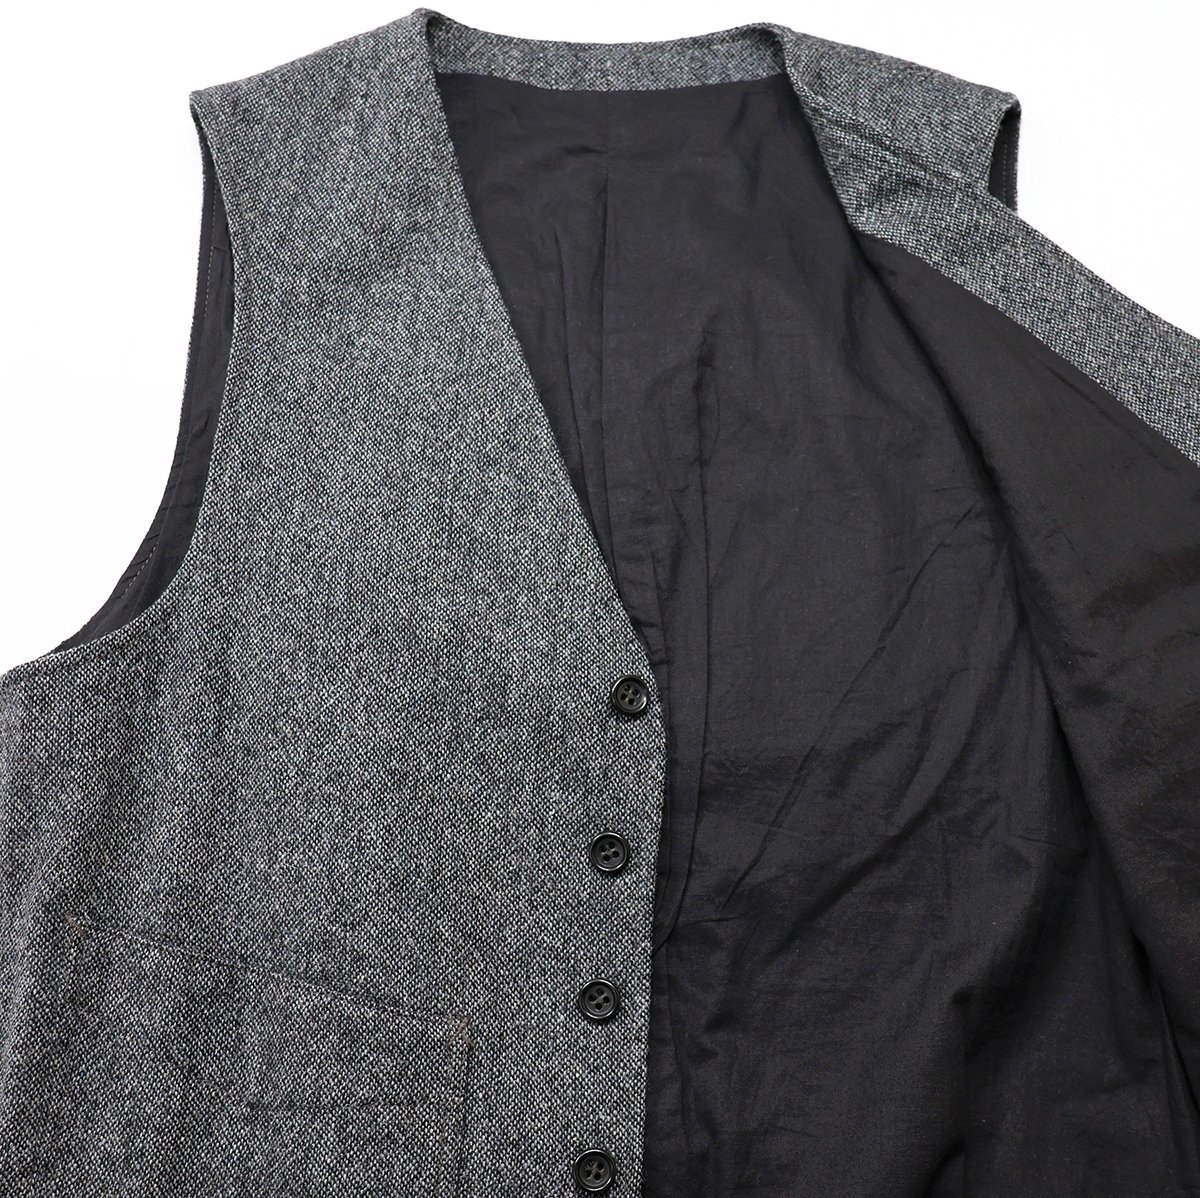 Workers K&T H MFG Co (ワーカーズ) Vest Oatmeal / ツイードベスト 美品 オートミール size 36(S)_画像3